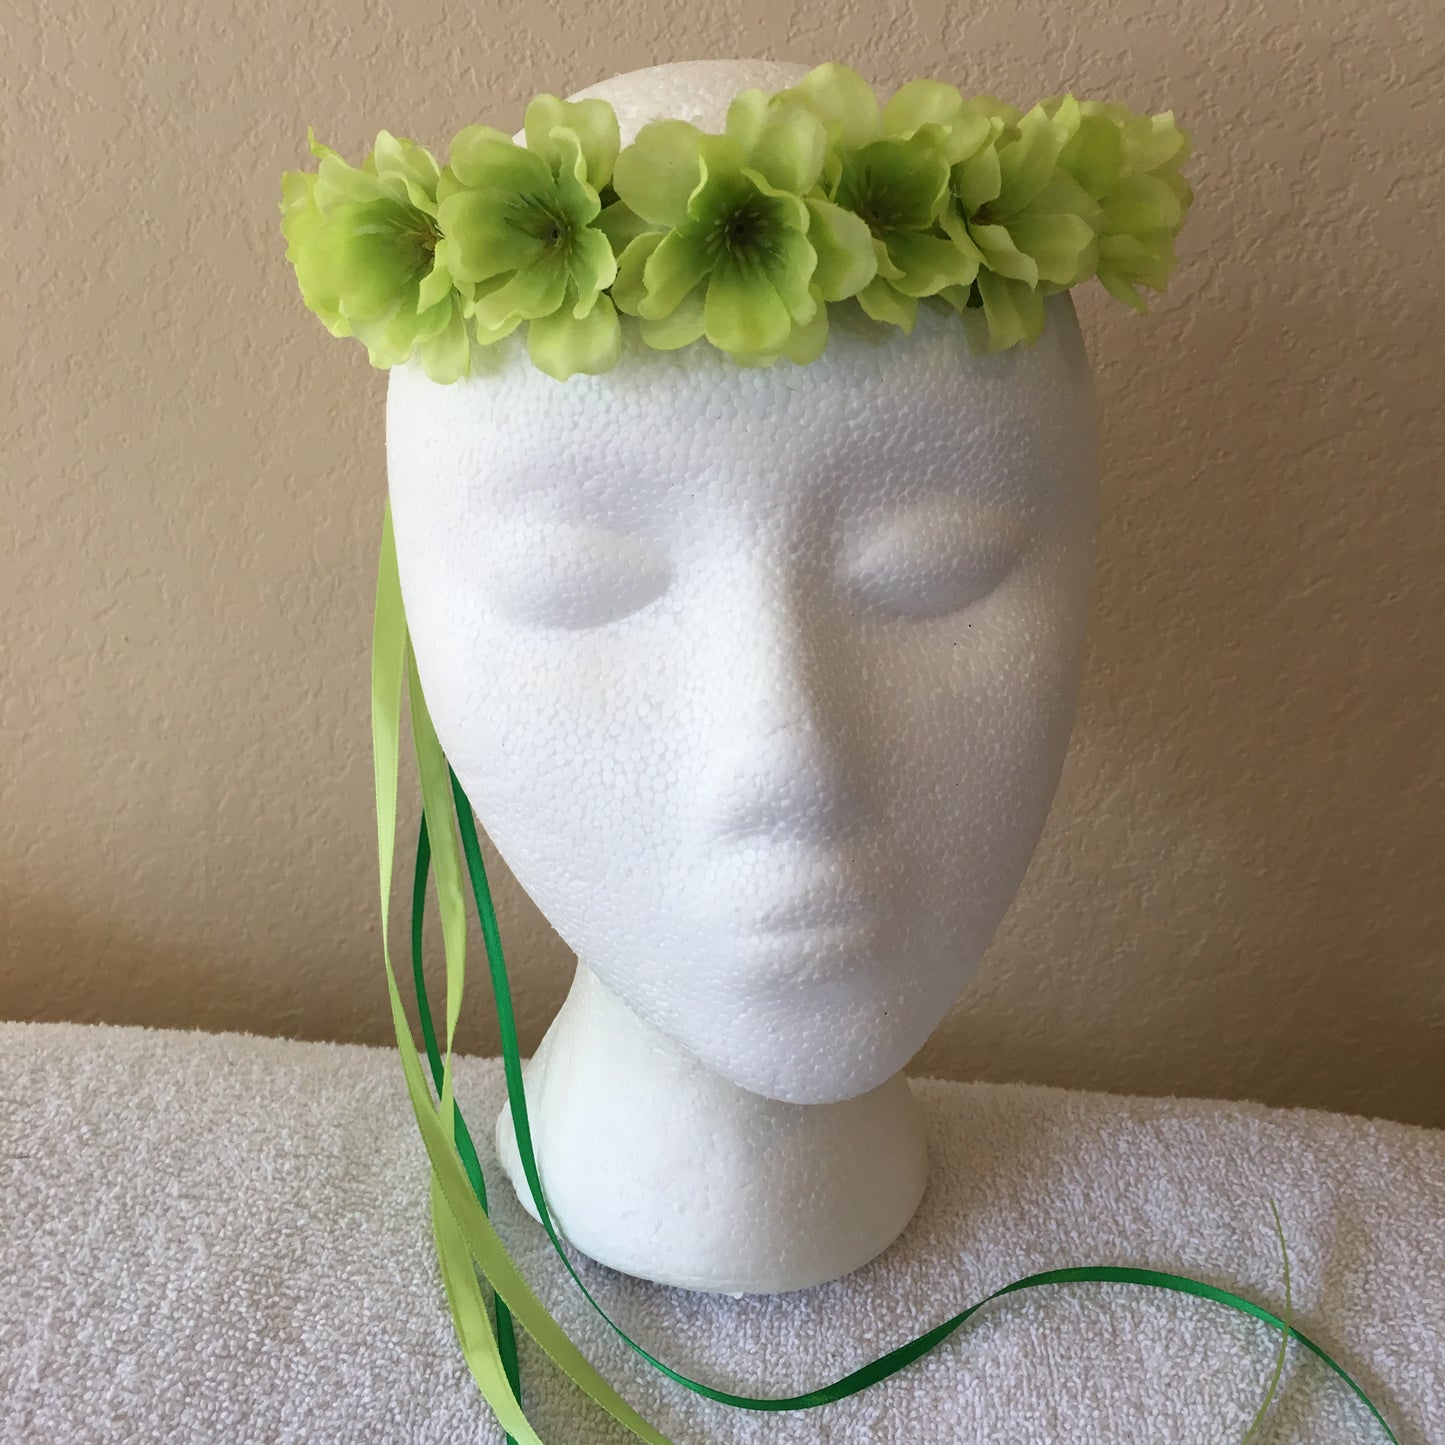 Extra Small Wreath - Solid bright green flowers